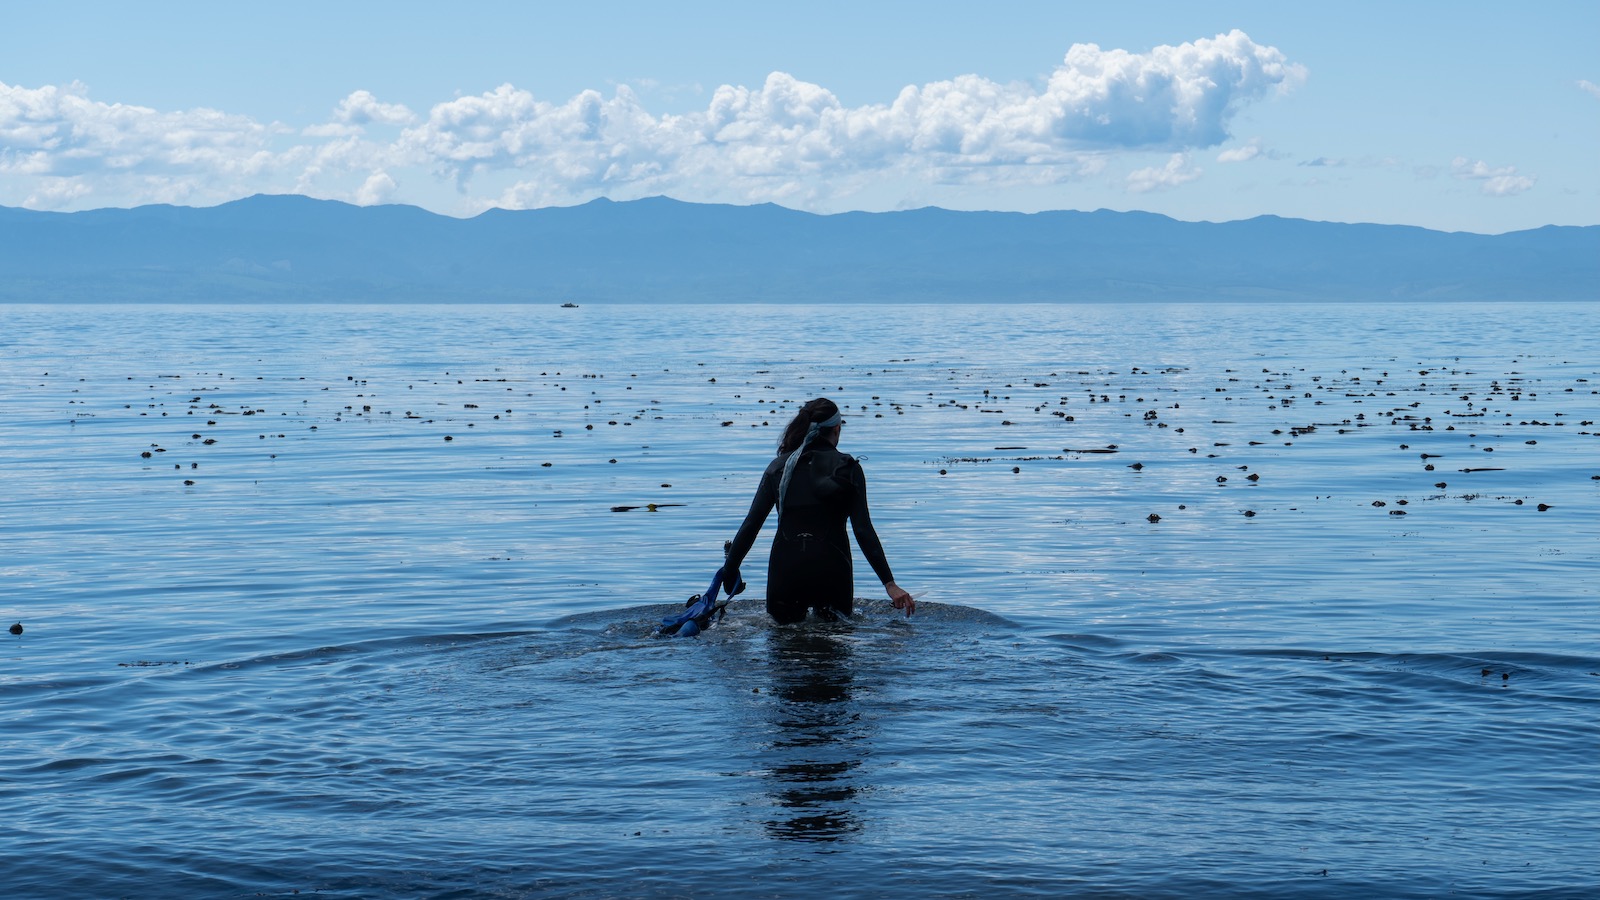 A diver is seen from behind wading into the calm water off the coast of Vancouver Island to harvest wild seaweed.